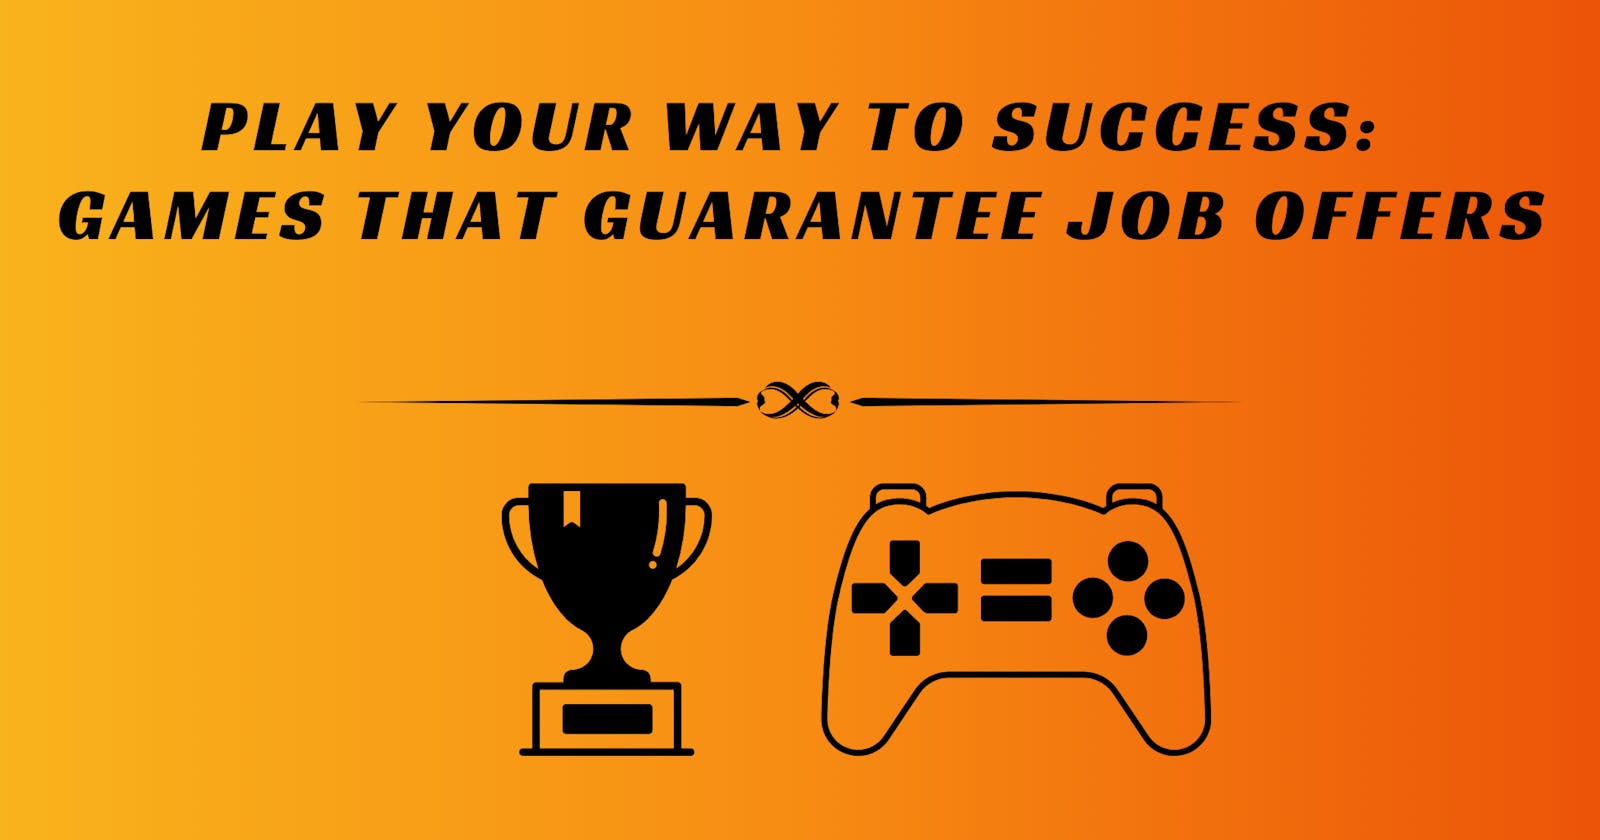 Play Your Way to Success: Games That Guarantee Job Offers